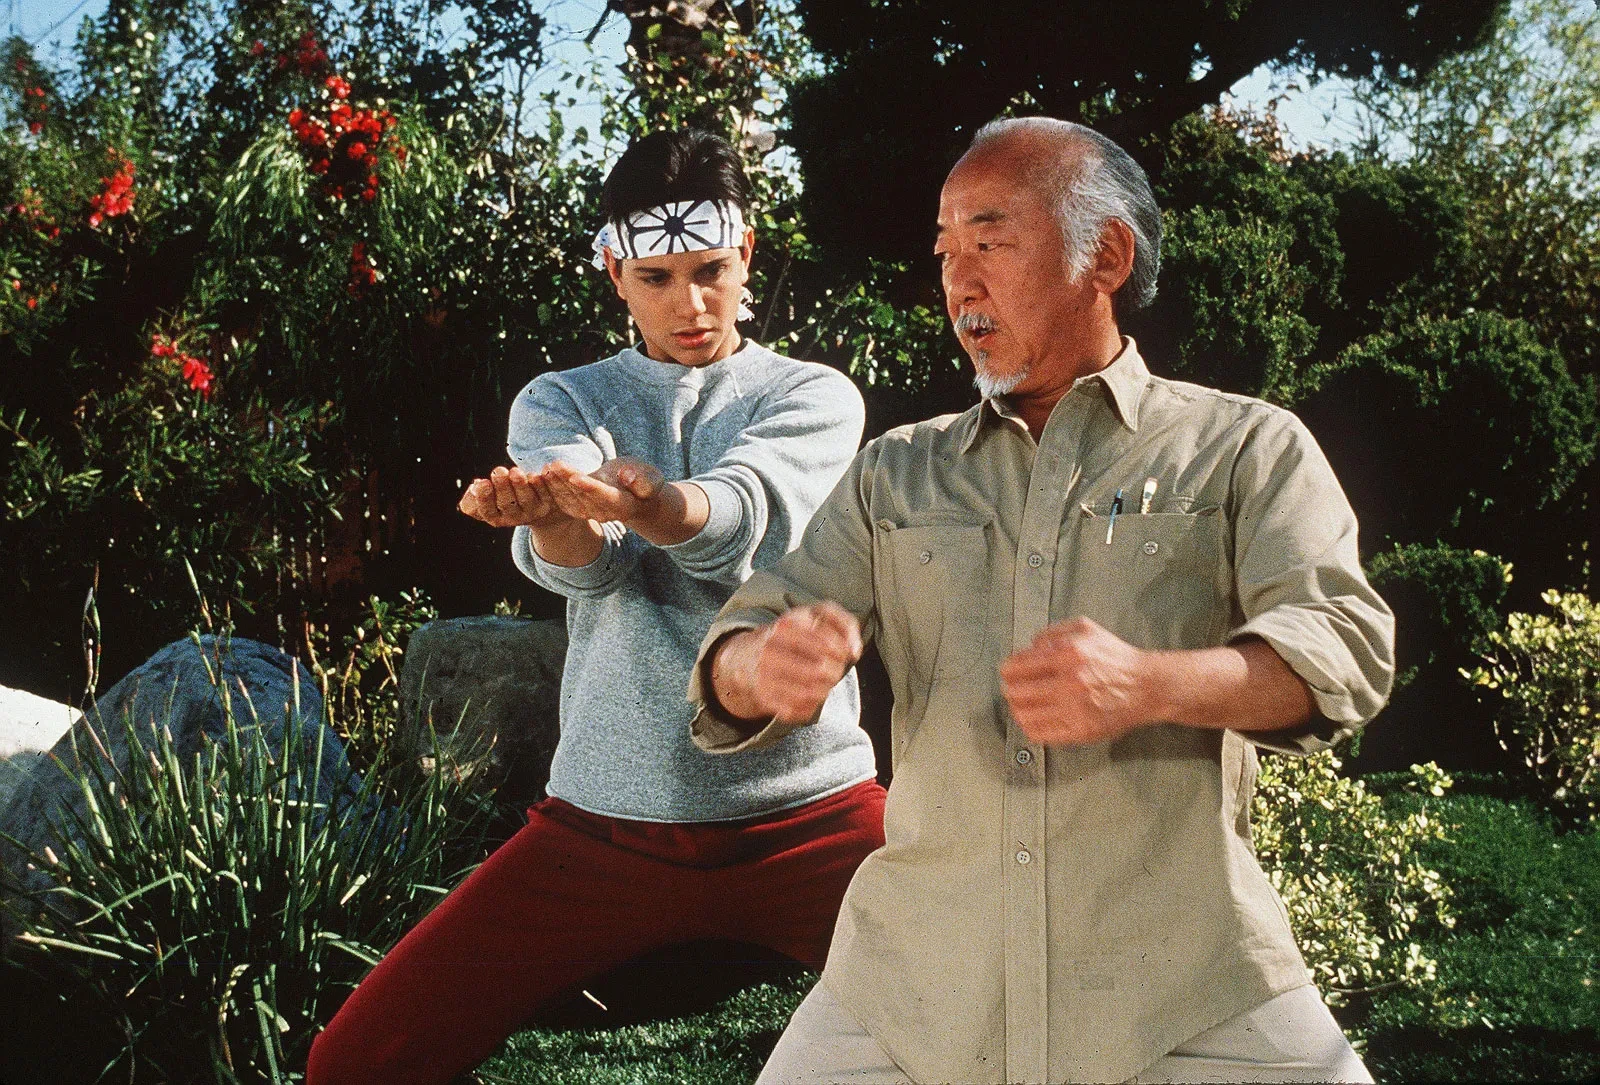 Pat Morita and Ralph Macchio in a still from The Karate Kid series